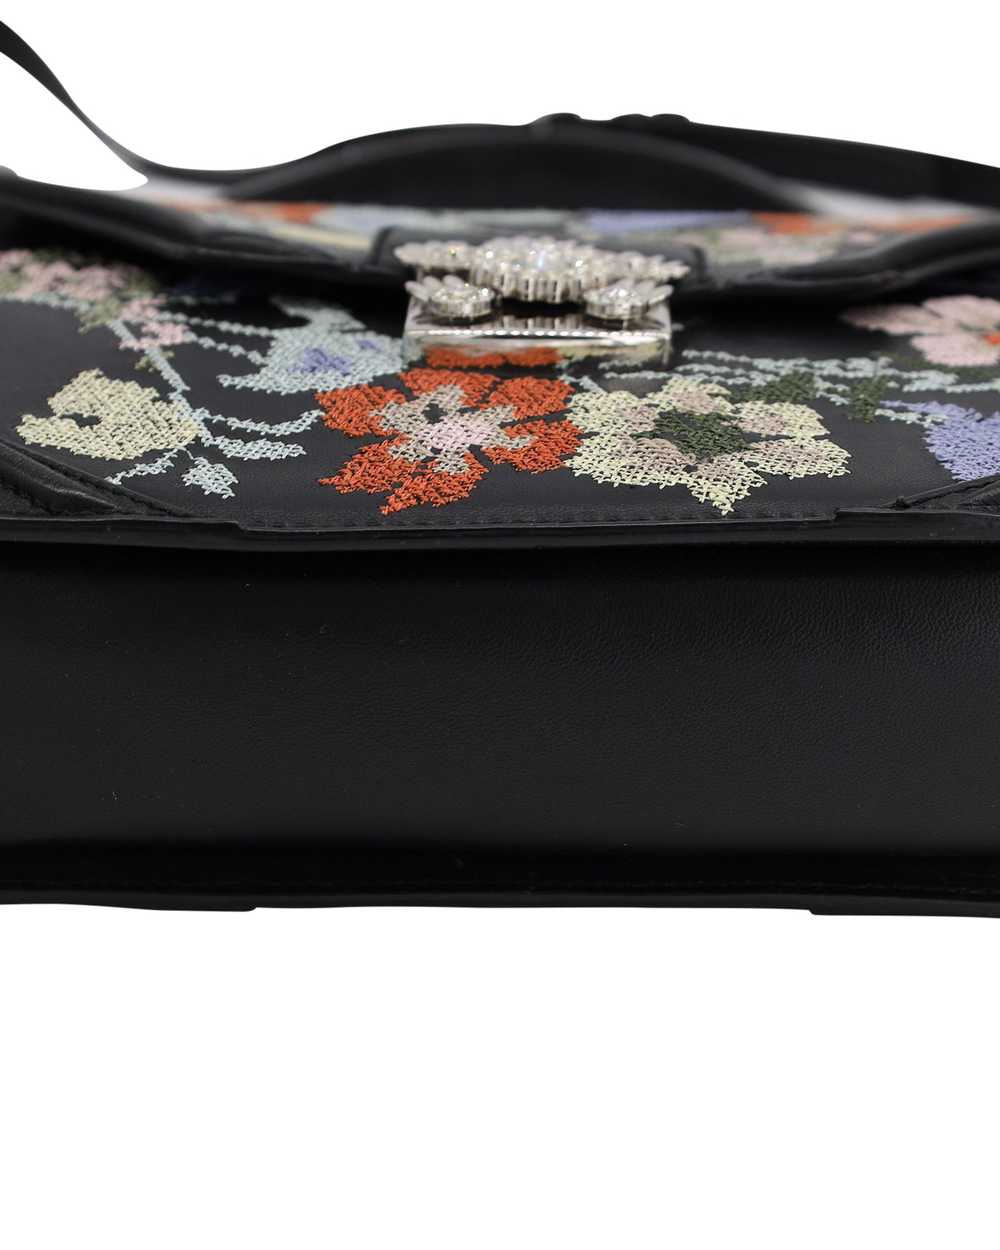 Product Details Floral Embroidered Top Handle Bag - image 5